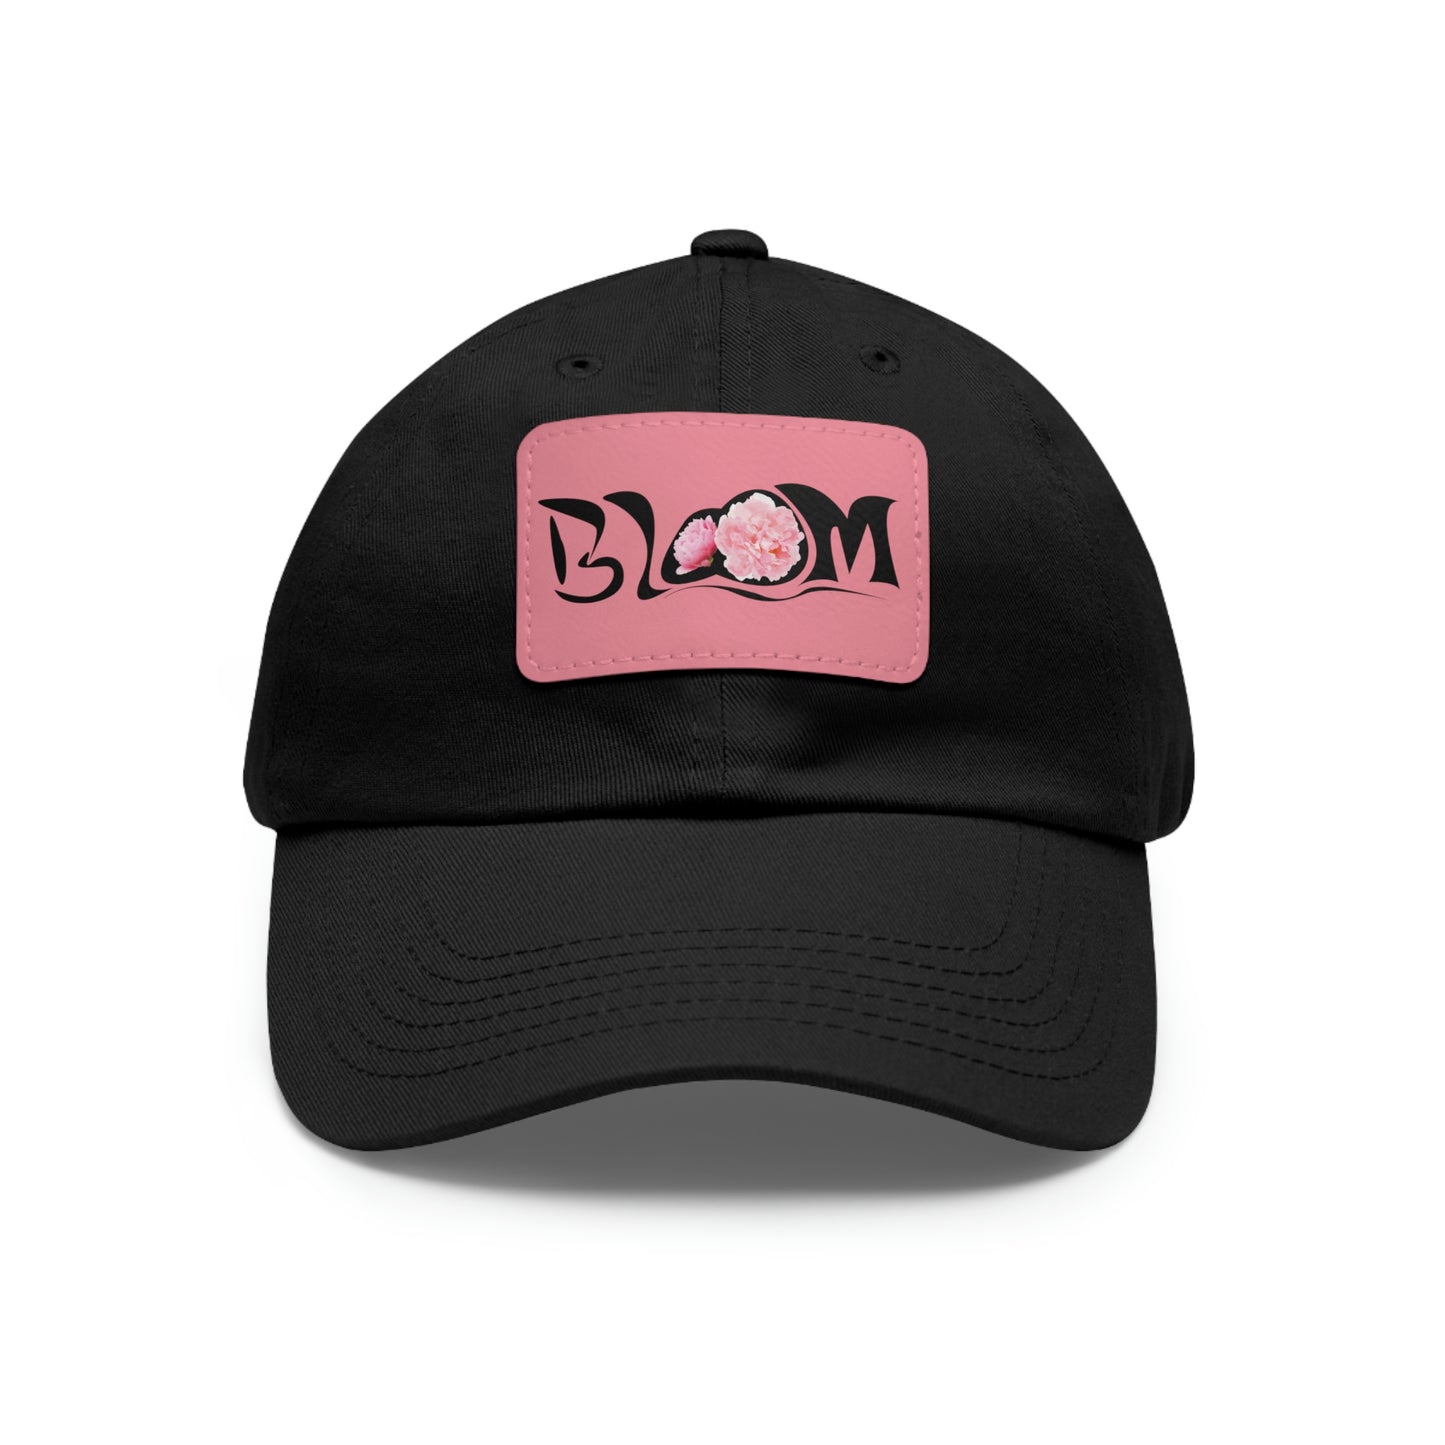 "Bloom" Dad Hat with Leather Patch